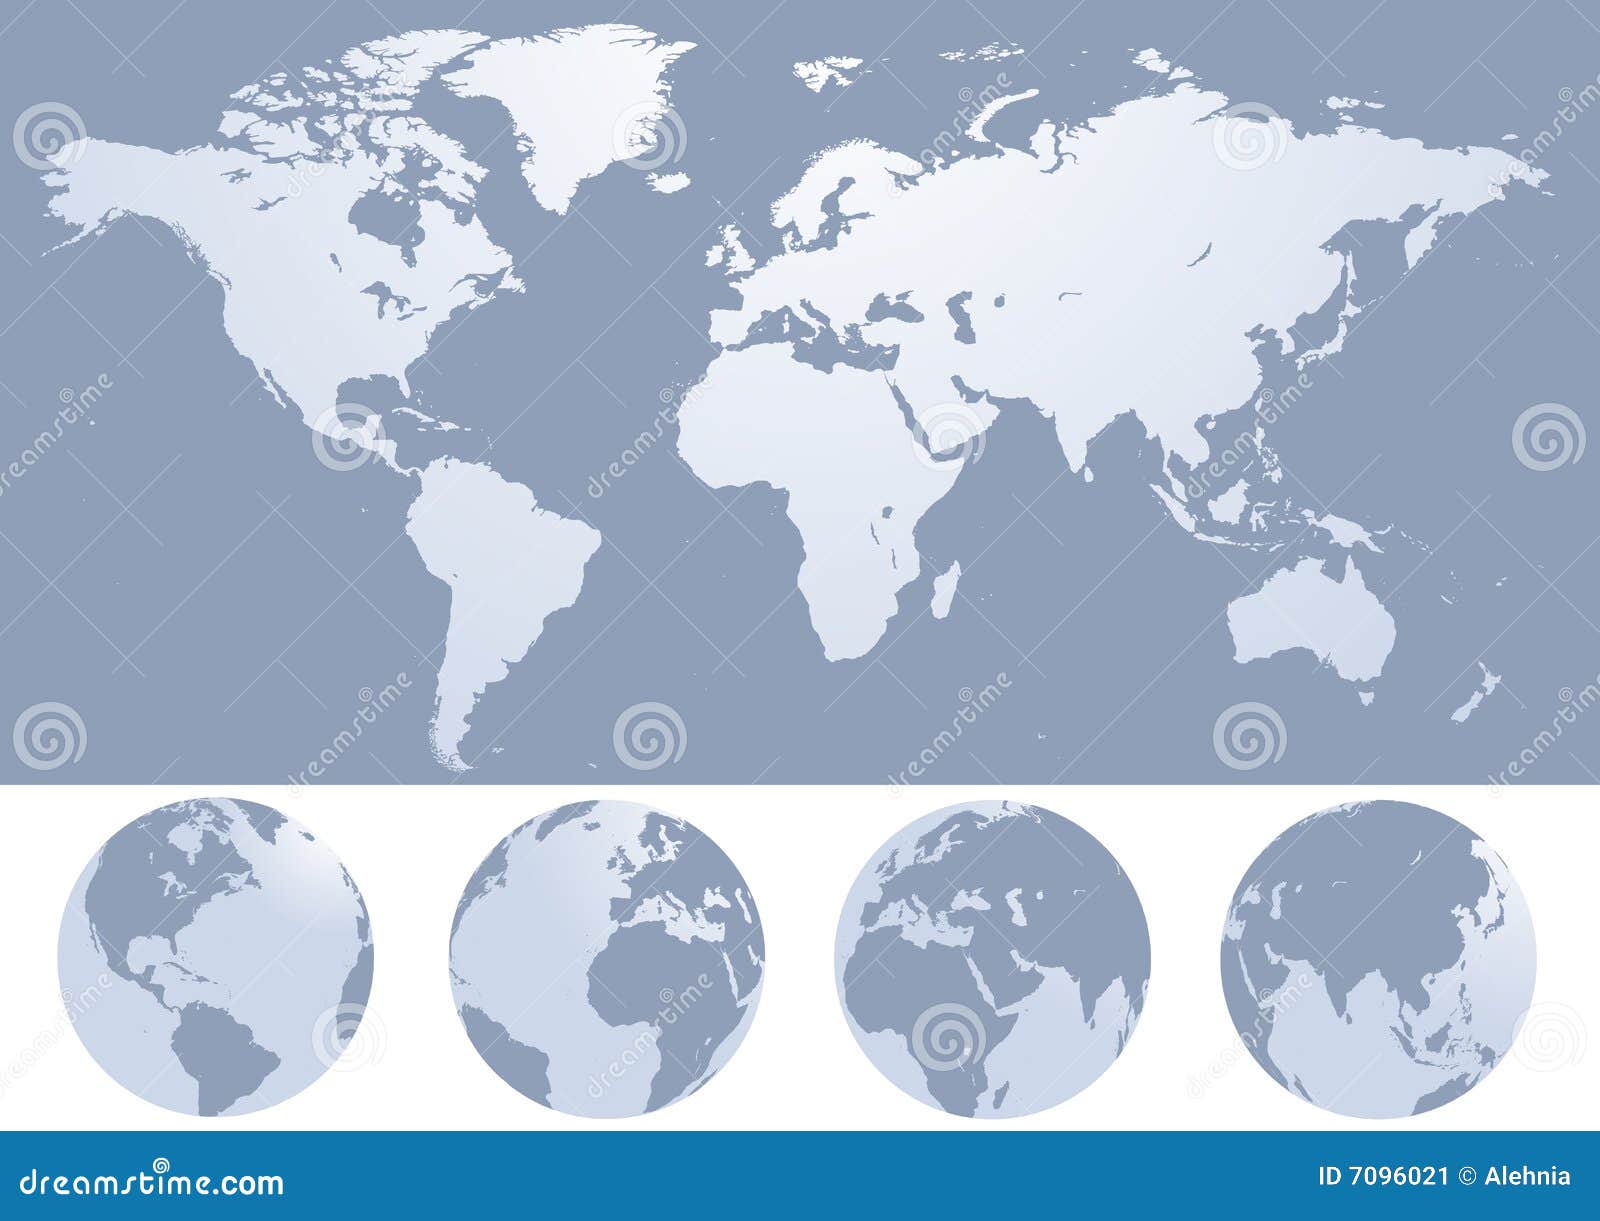 World Map Silhouette Stock Image - Image: 7096021